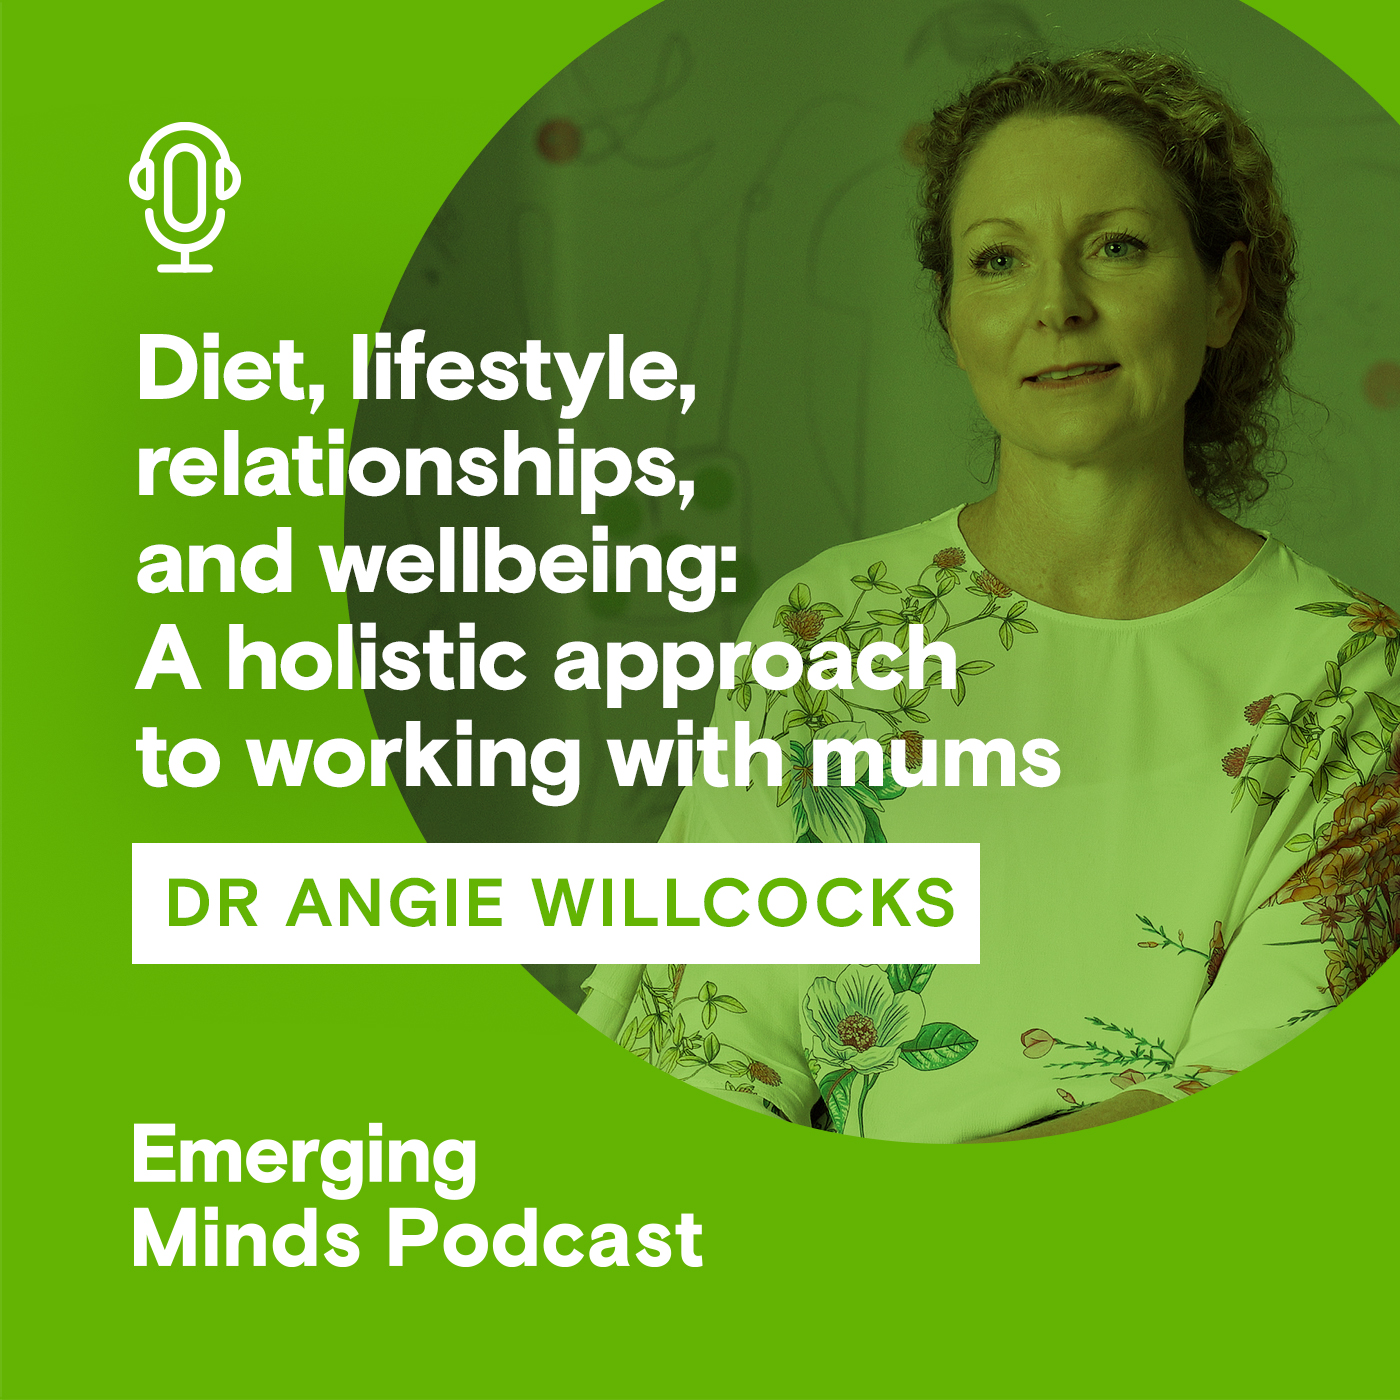 Diet, lifestyle, relationships, and wellbeing: A holistic approach to working with mums